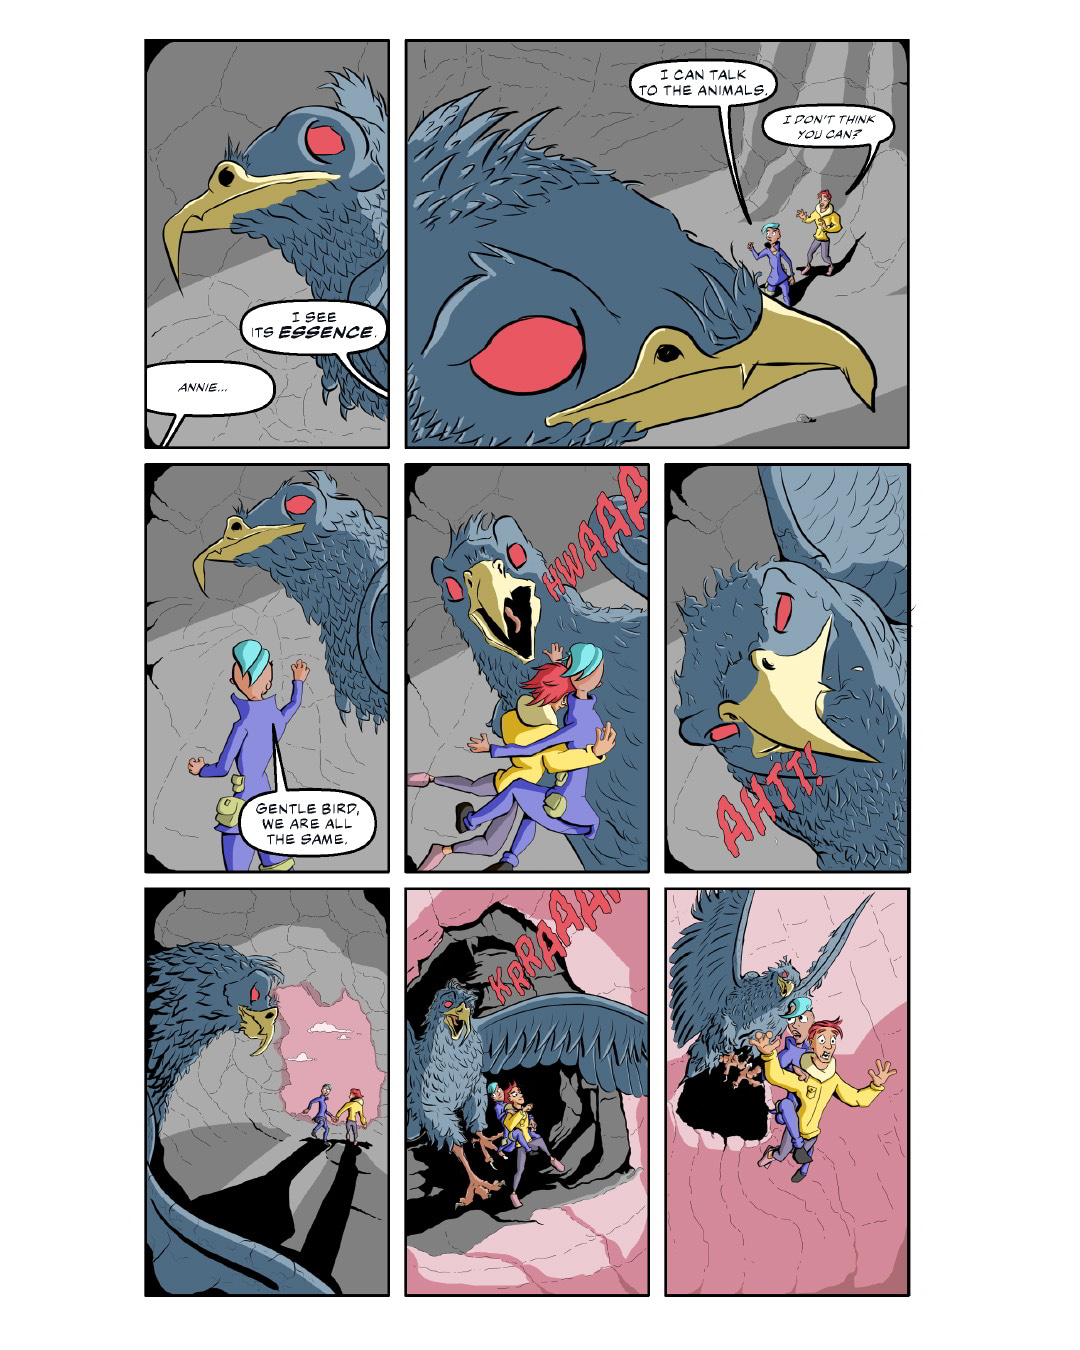 Panels from a webcomic, two spacefaring heroes in the lair of a big bird